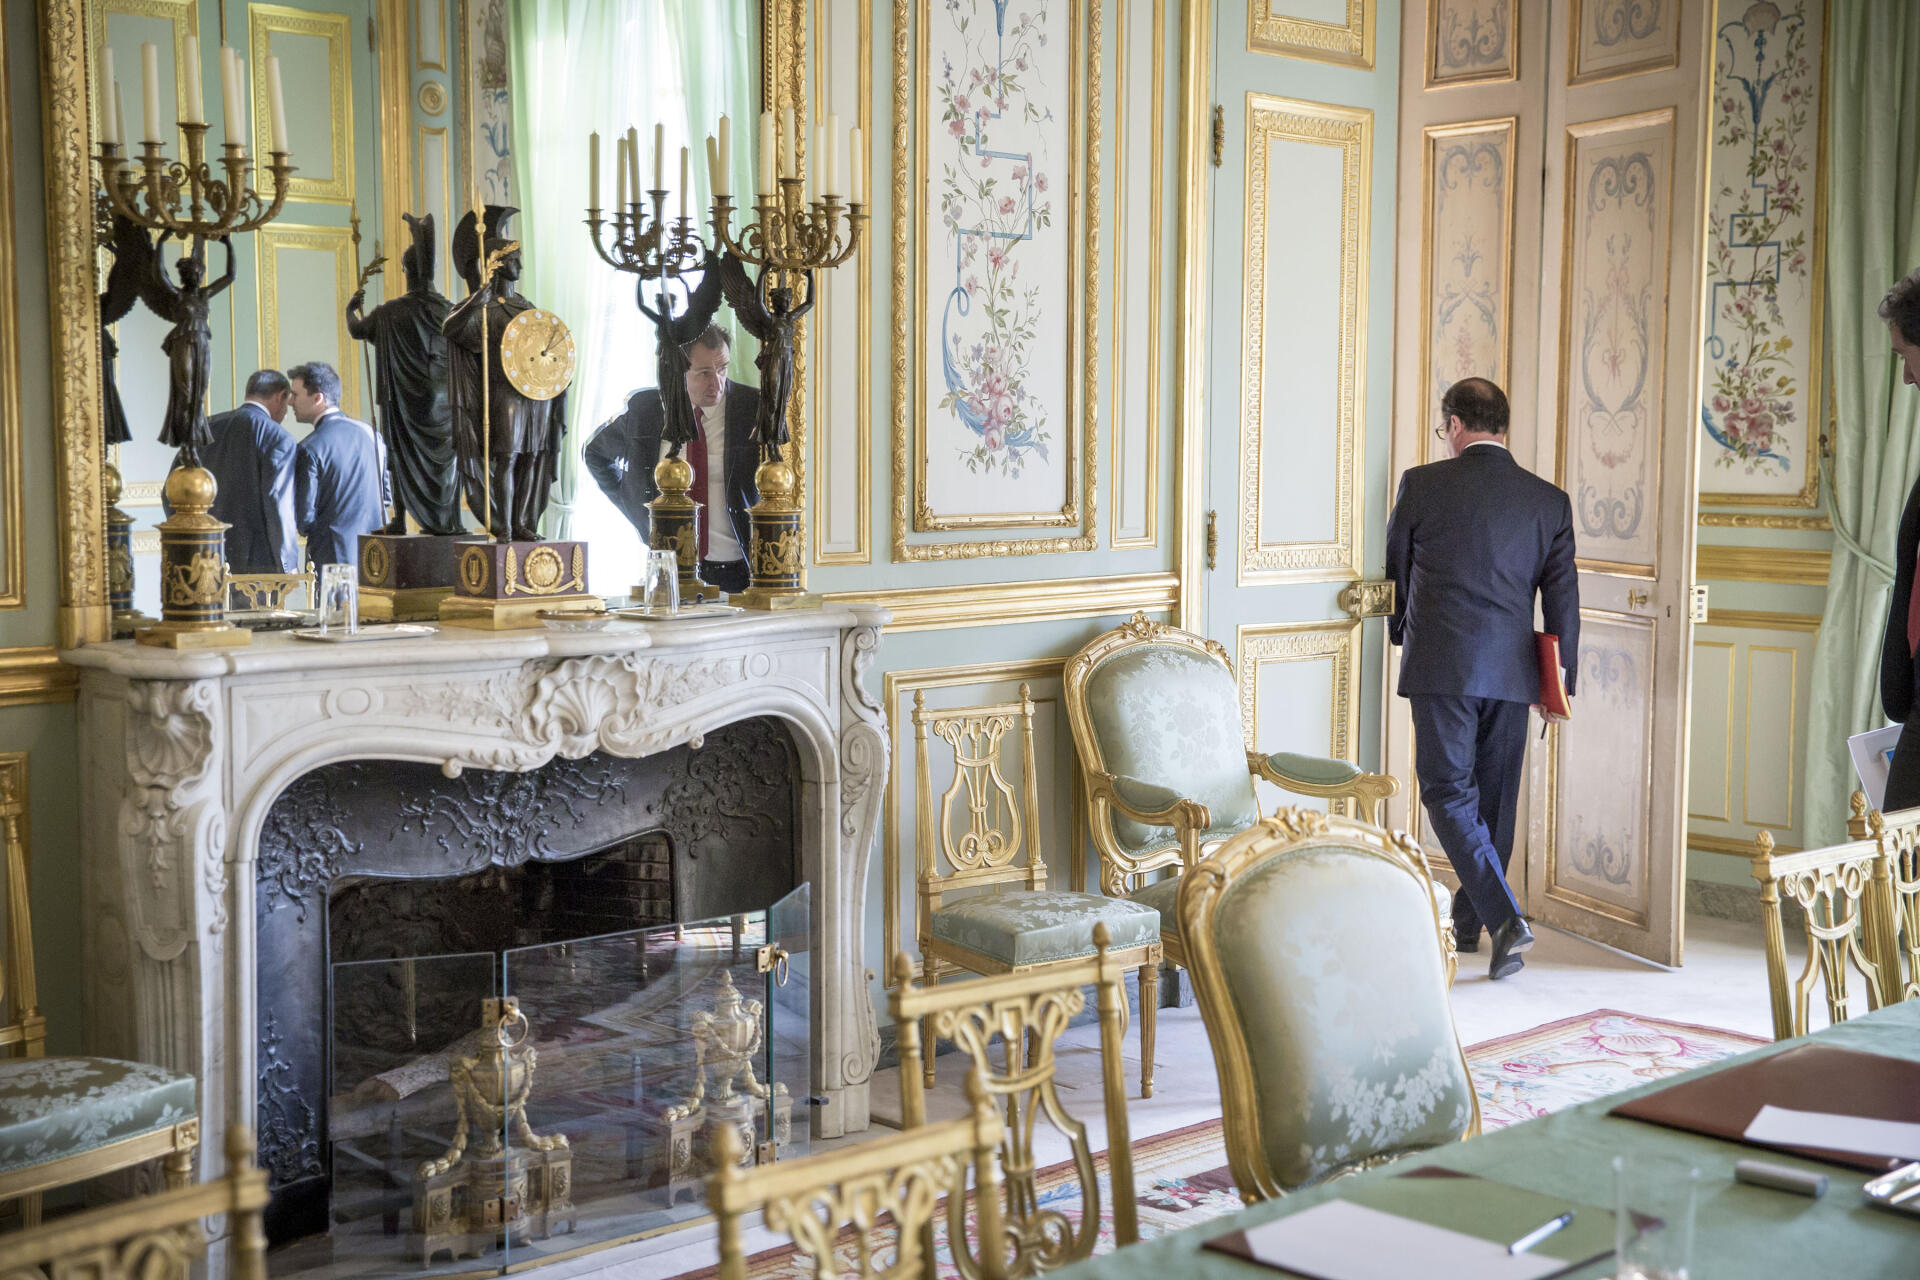 At the Palais de l'Elysée, in Paris, Thursday January 22, 2015. In the mirror, Gaspard Gantzer, communications adviser, speaks in the ear of Jean-Pierre Jouyet, secretary general of the Elysée.  Vincent Feltesse, adviser to the presidency, watches François Hollande, President of the Republic, come out of the green room.